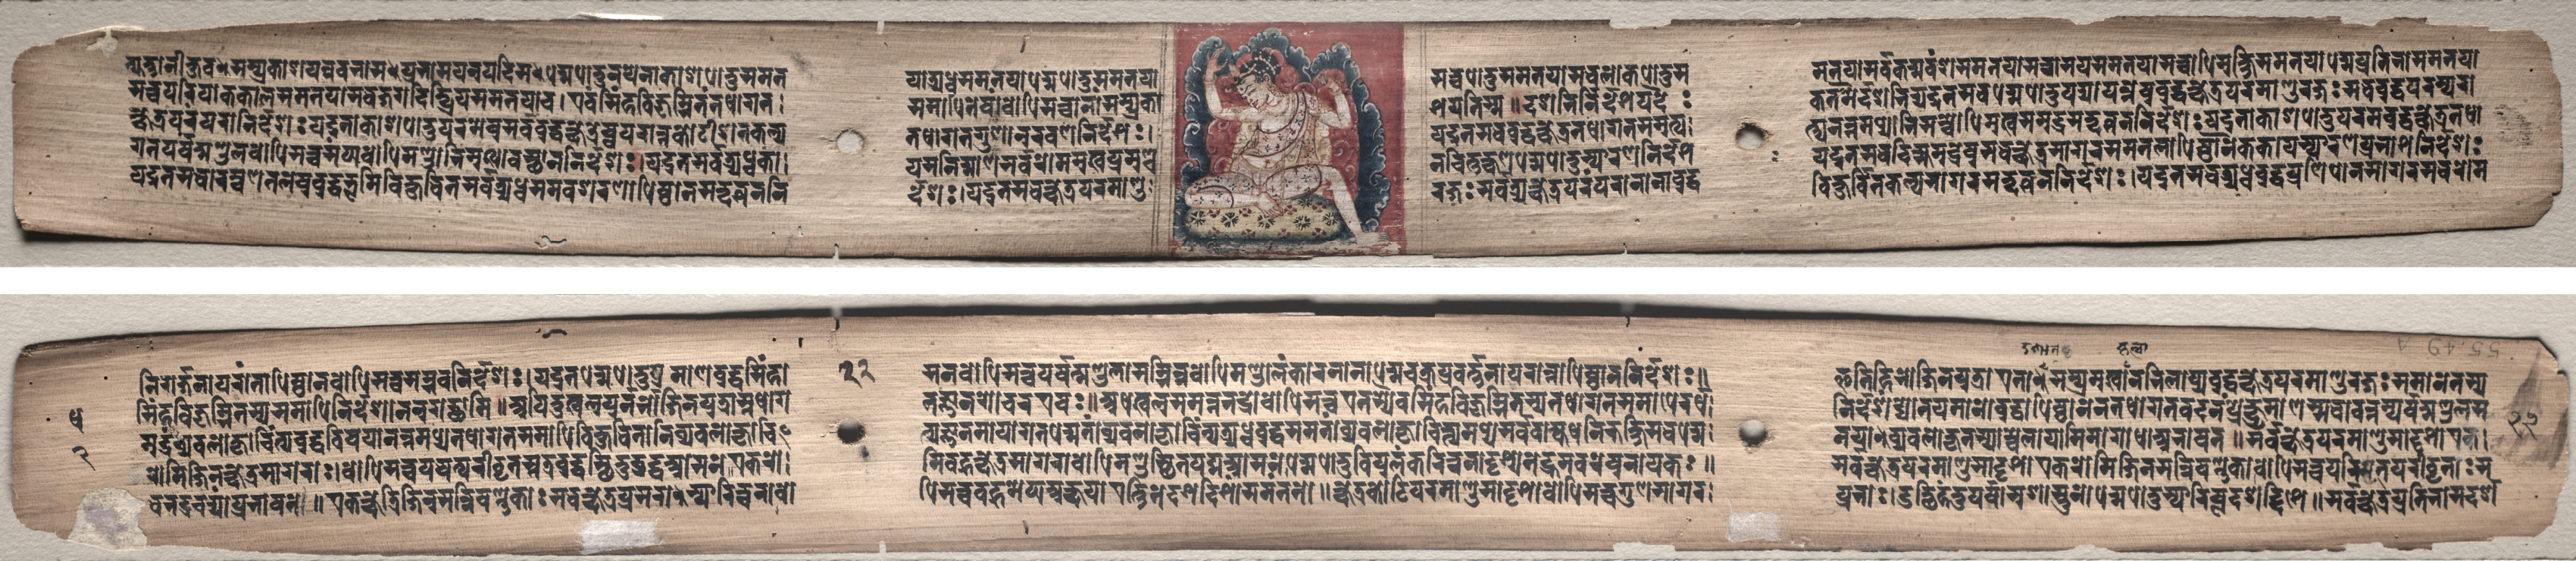 Folio 22 from a Gandavyuha-sutra (Scripture of the Supreme Array): Samantabhadra spinning clouds of things (recto); Text (verso)